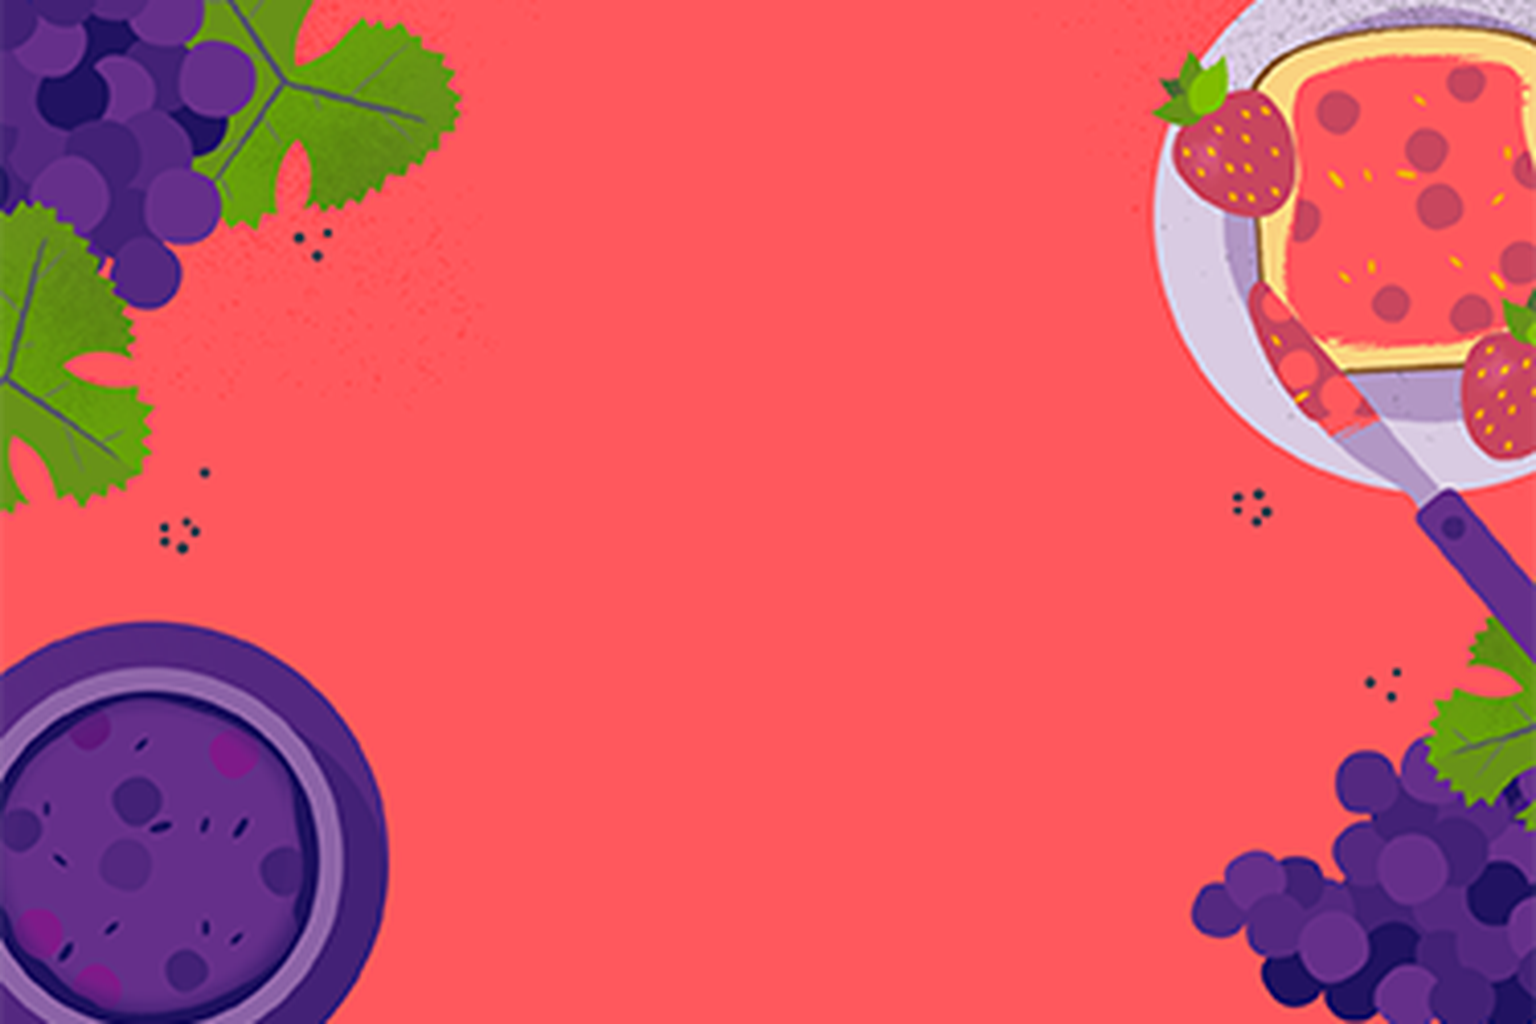 Illustration of grapes and strawberries with a Fruit text overlay